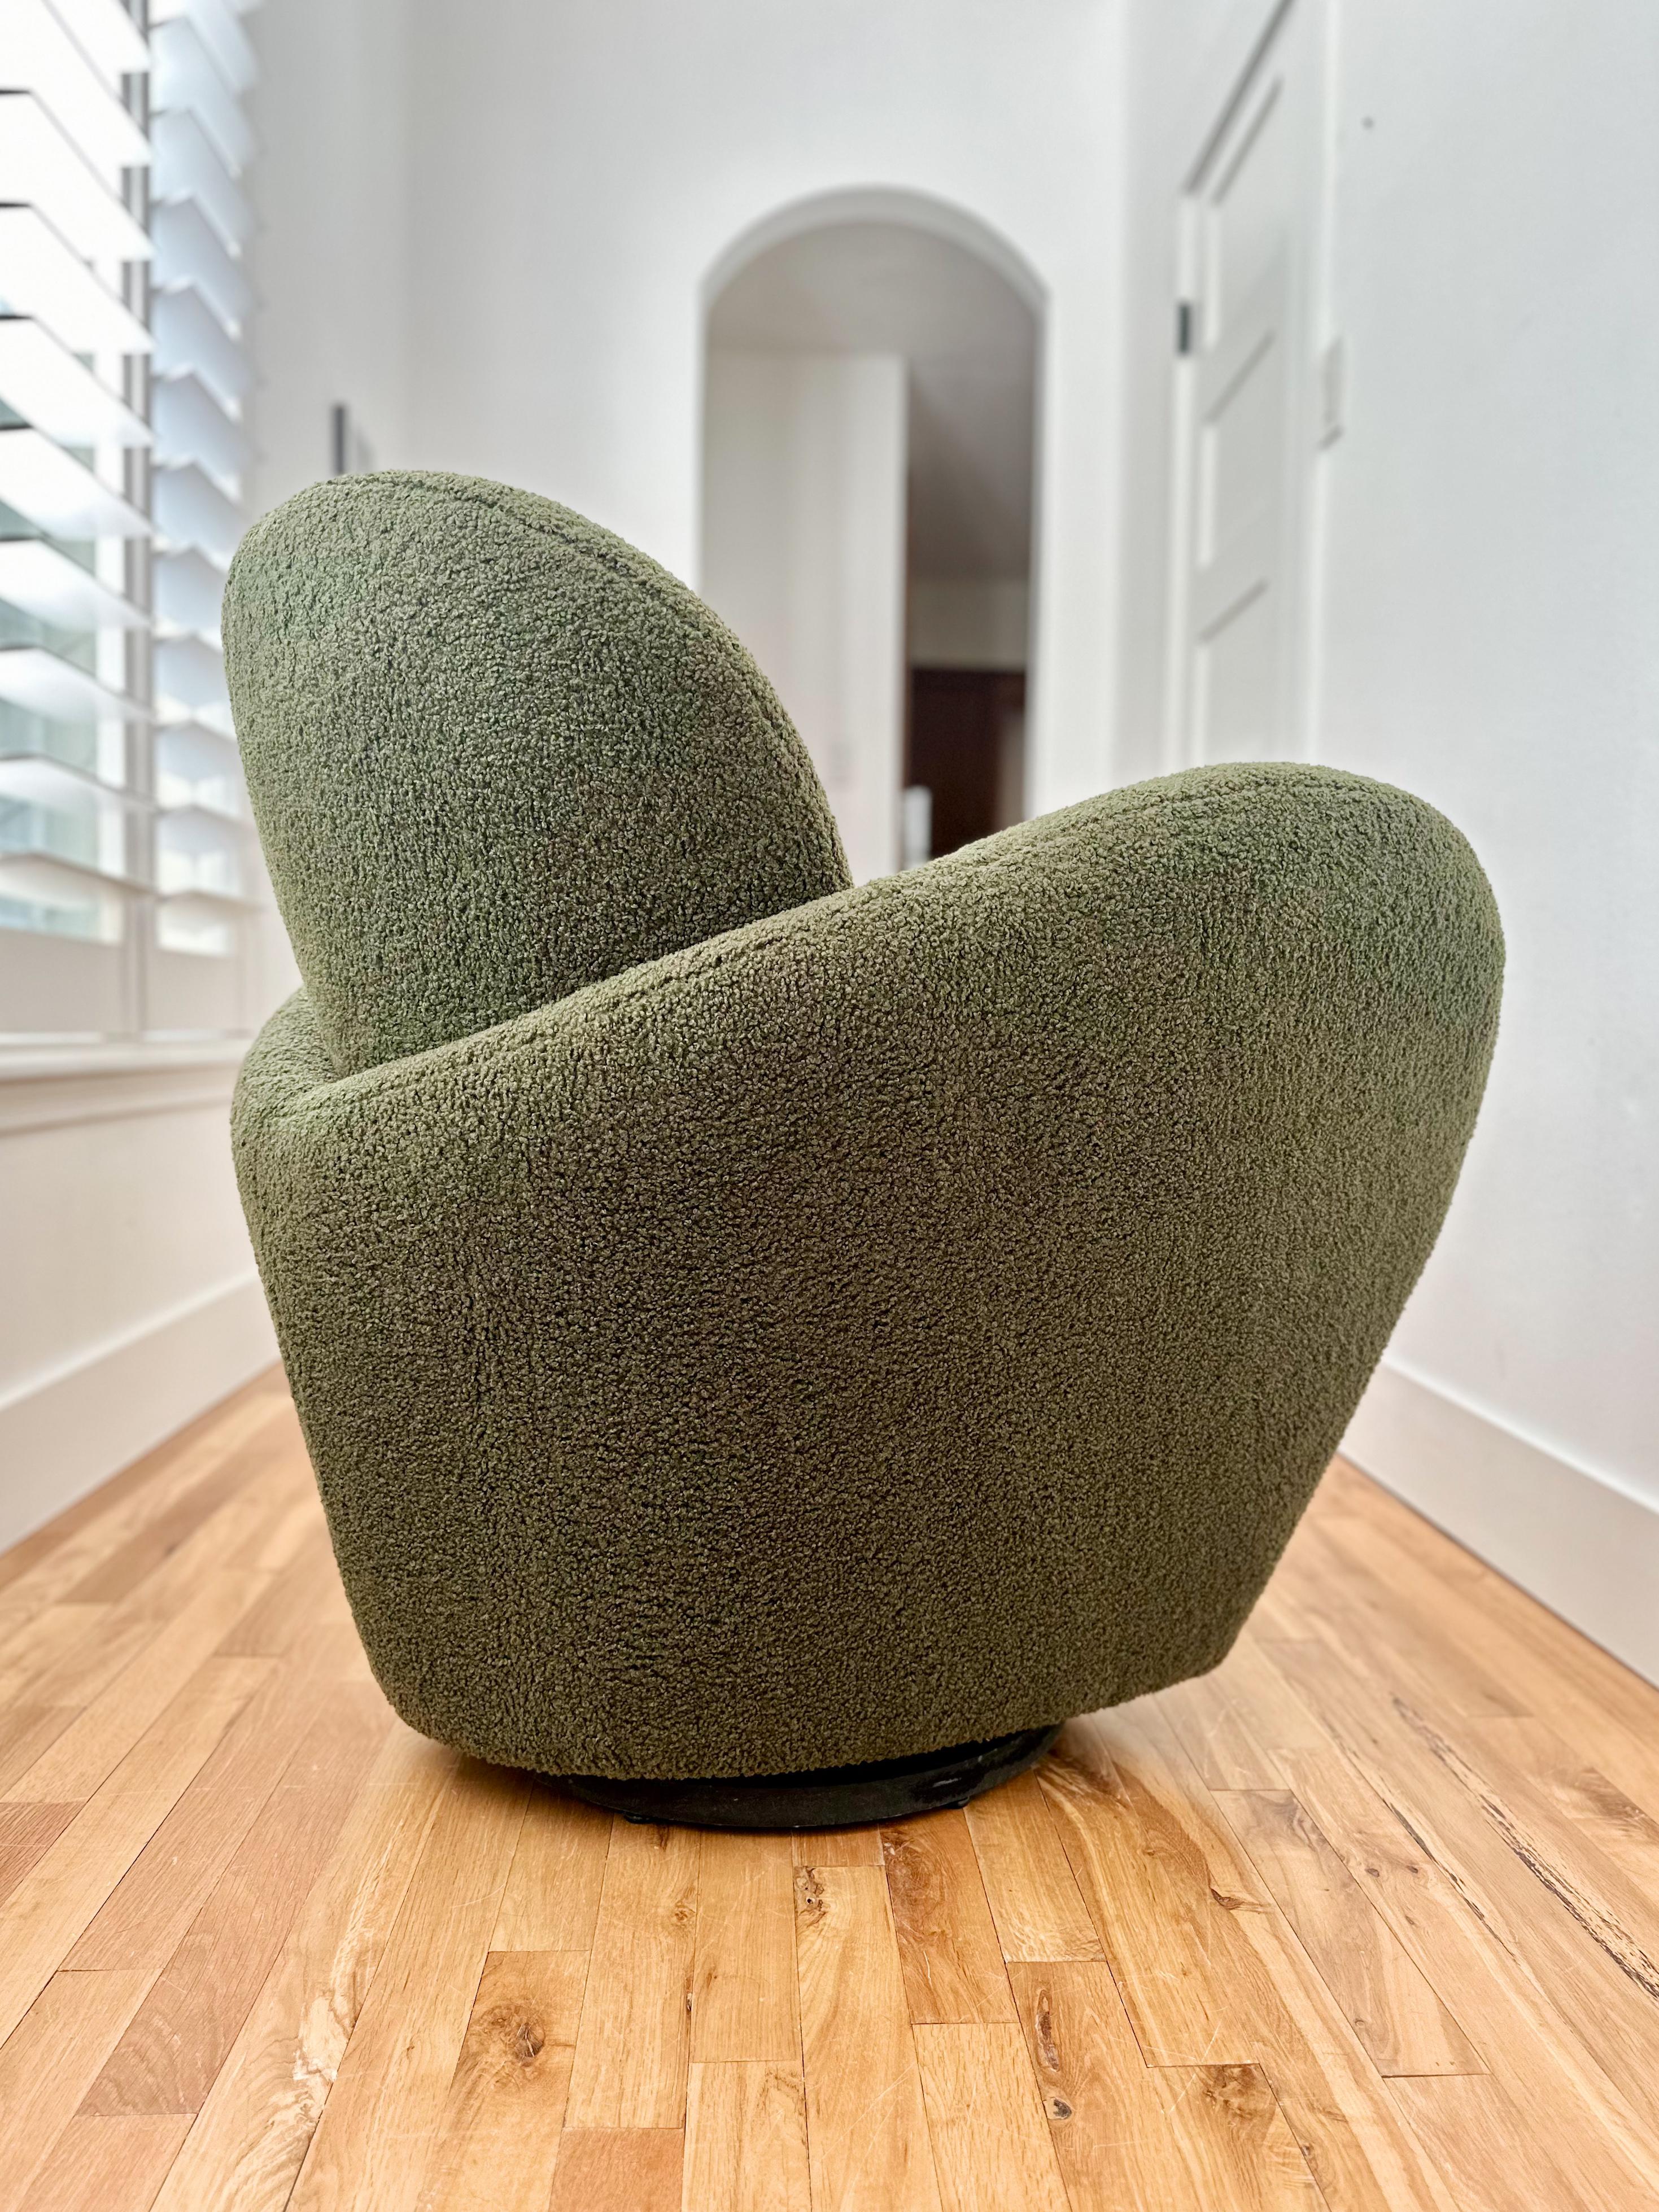 1980s 'Miami' Chair and Ottoman by Michael Wolk for Preview  In Excellent Condition For Sale In Houston, TX